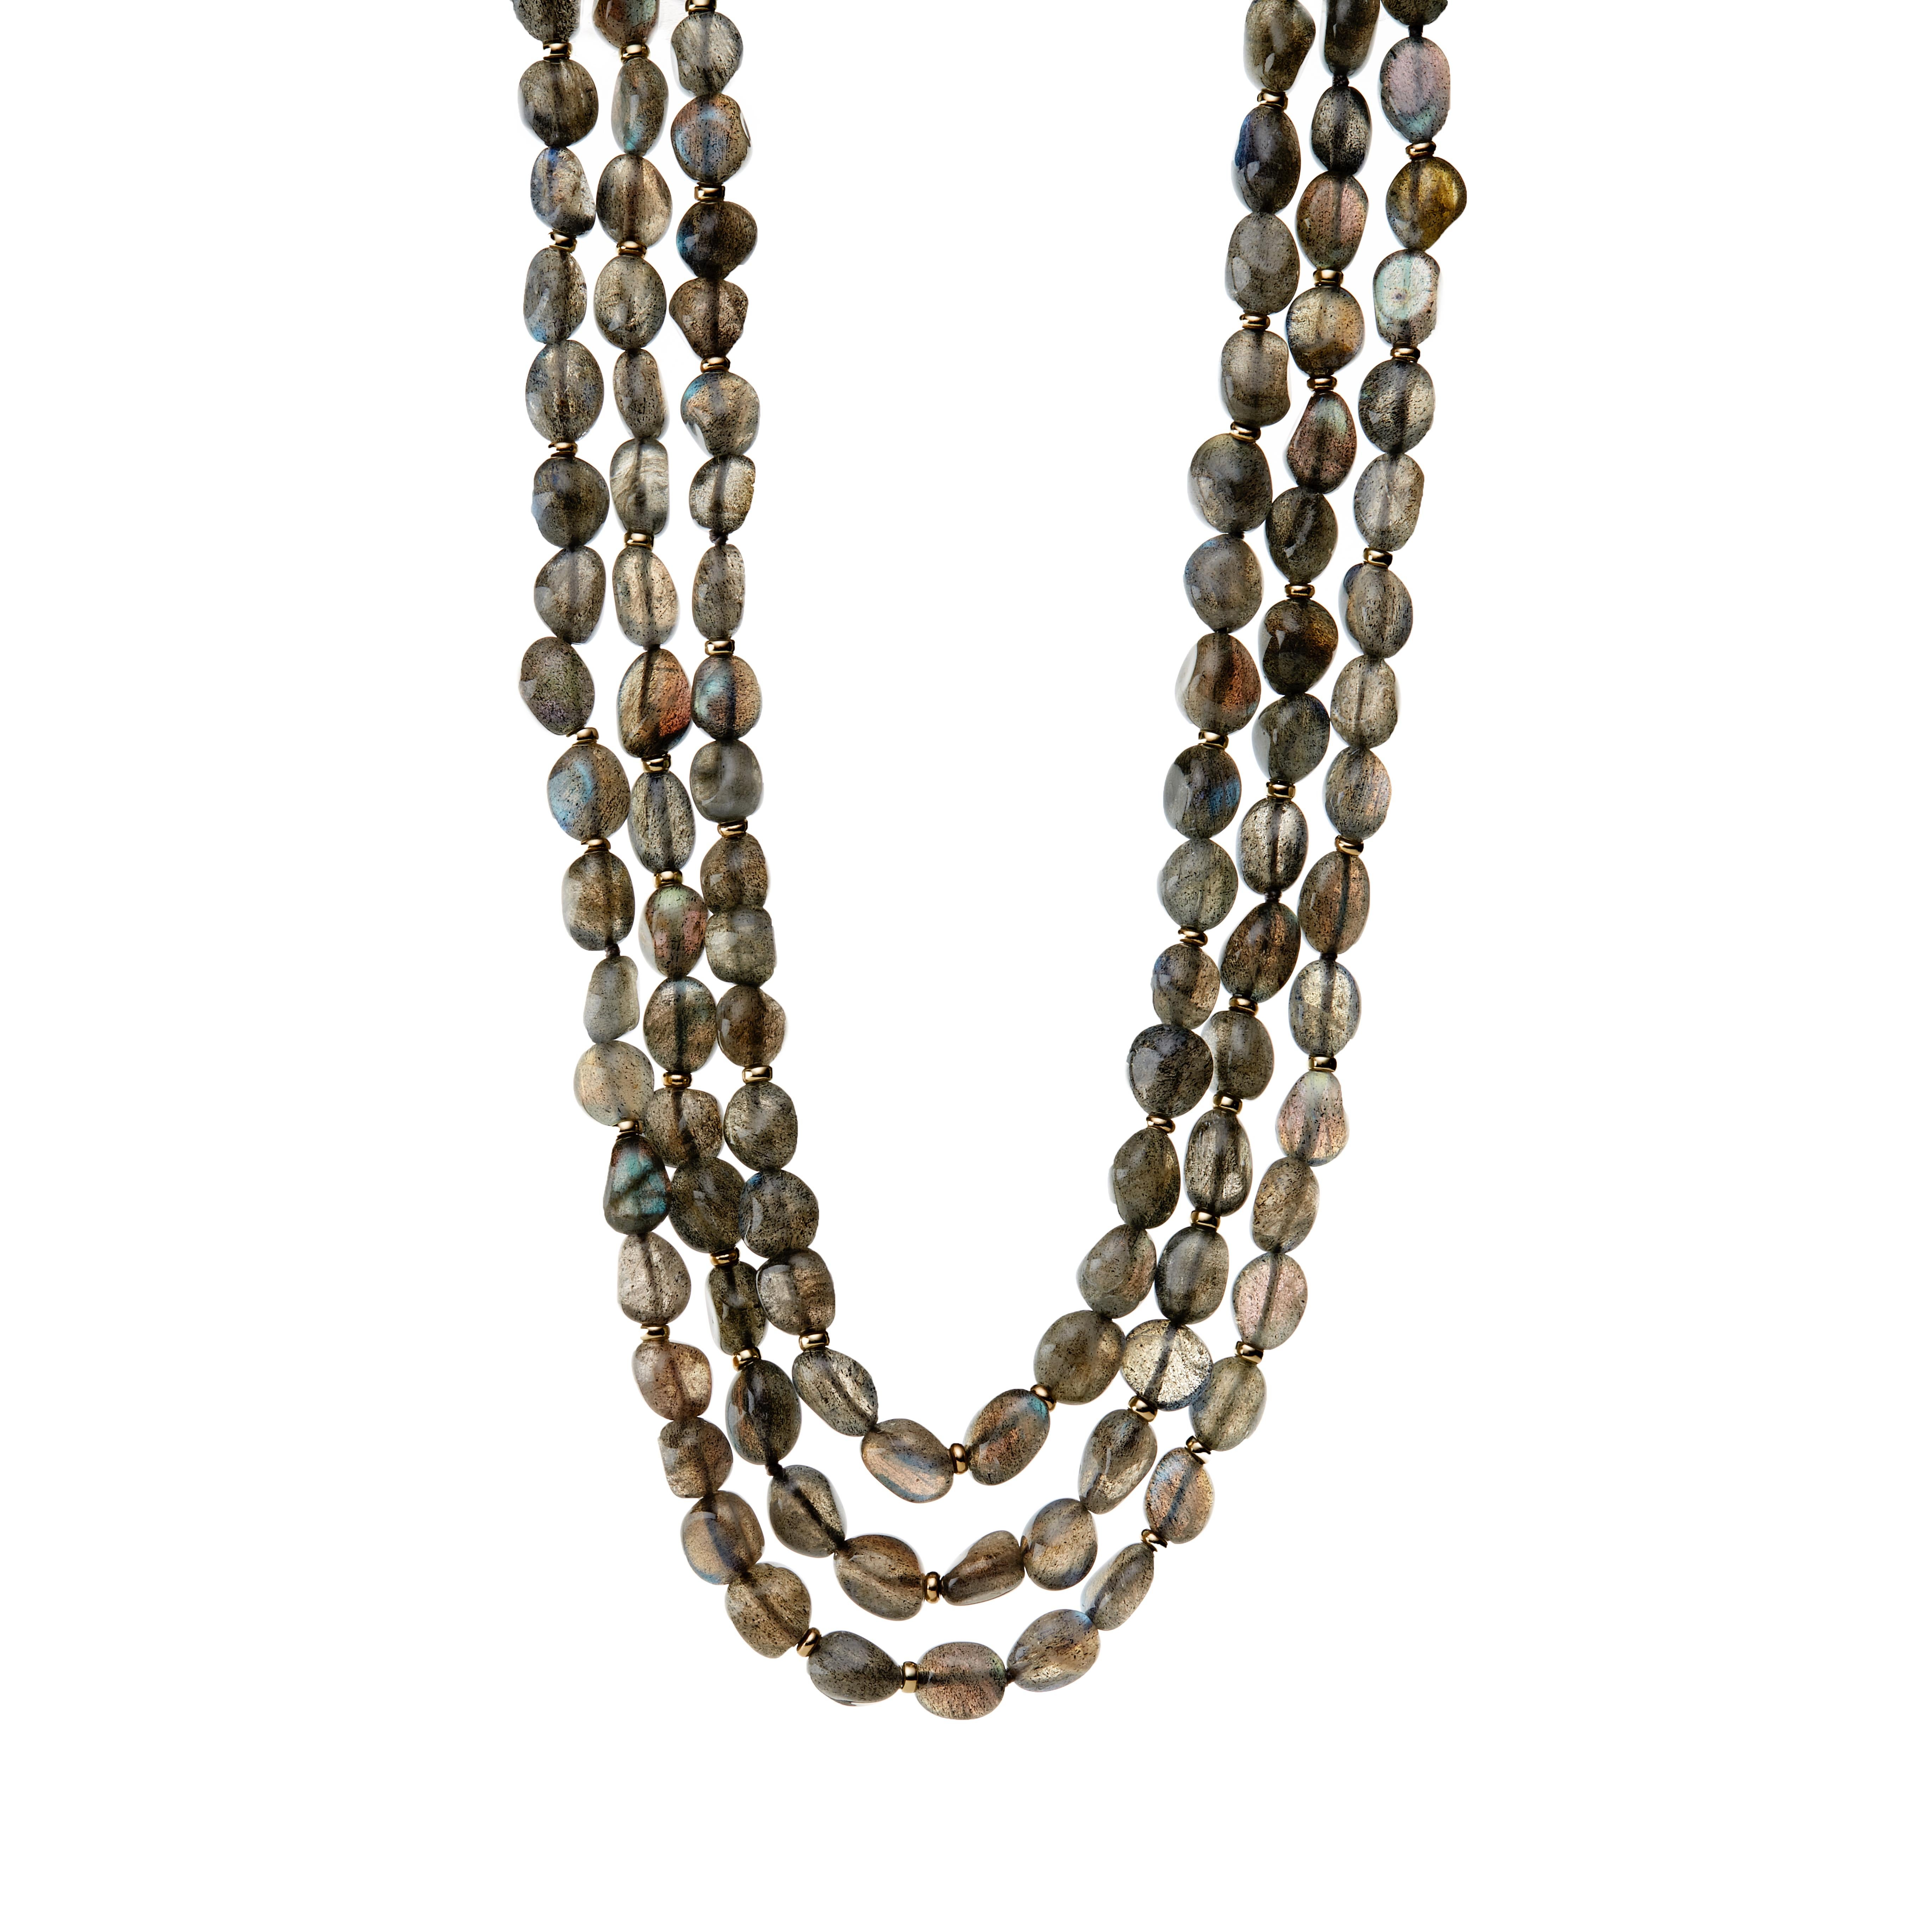 Created in 18 karat yellow gold
60 inches
Labradorite beads
18kyg roundels 
18kyg toggle clasp
Strung on silk
Limited edition

Crafted from 18 karat yellow gold, this limited edition necklace is elegantly accented by Labradorite beads and 18kyg